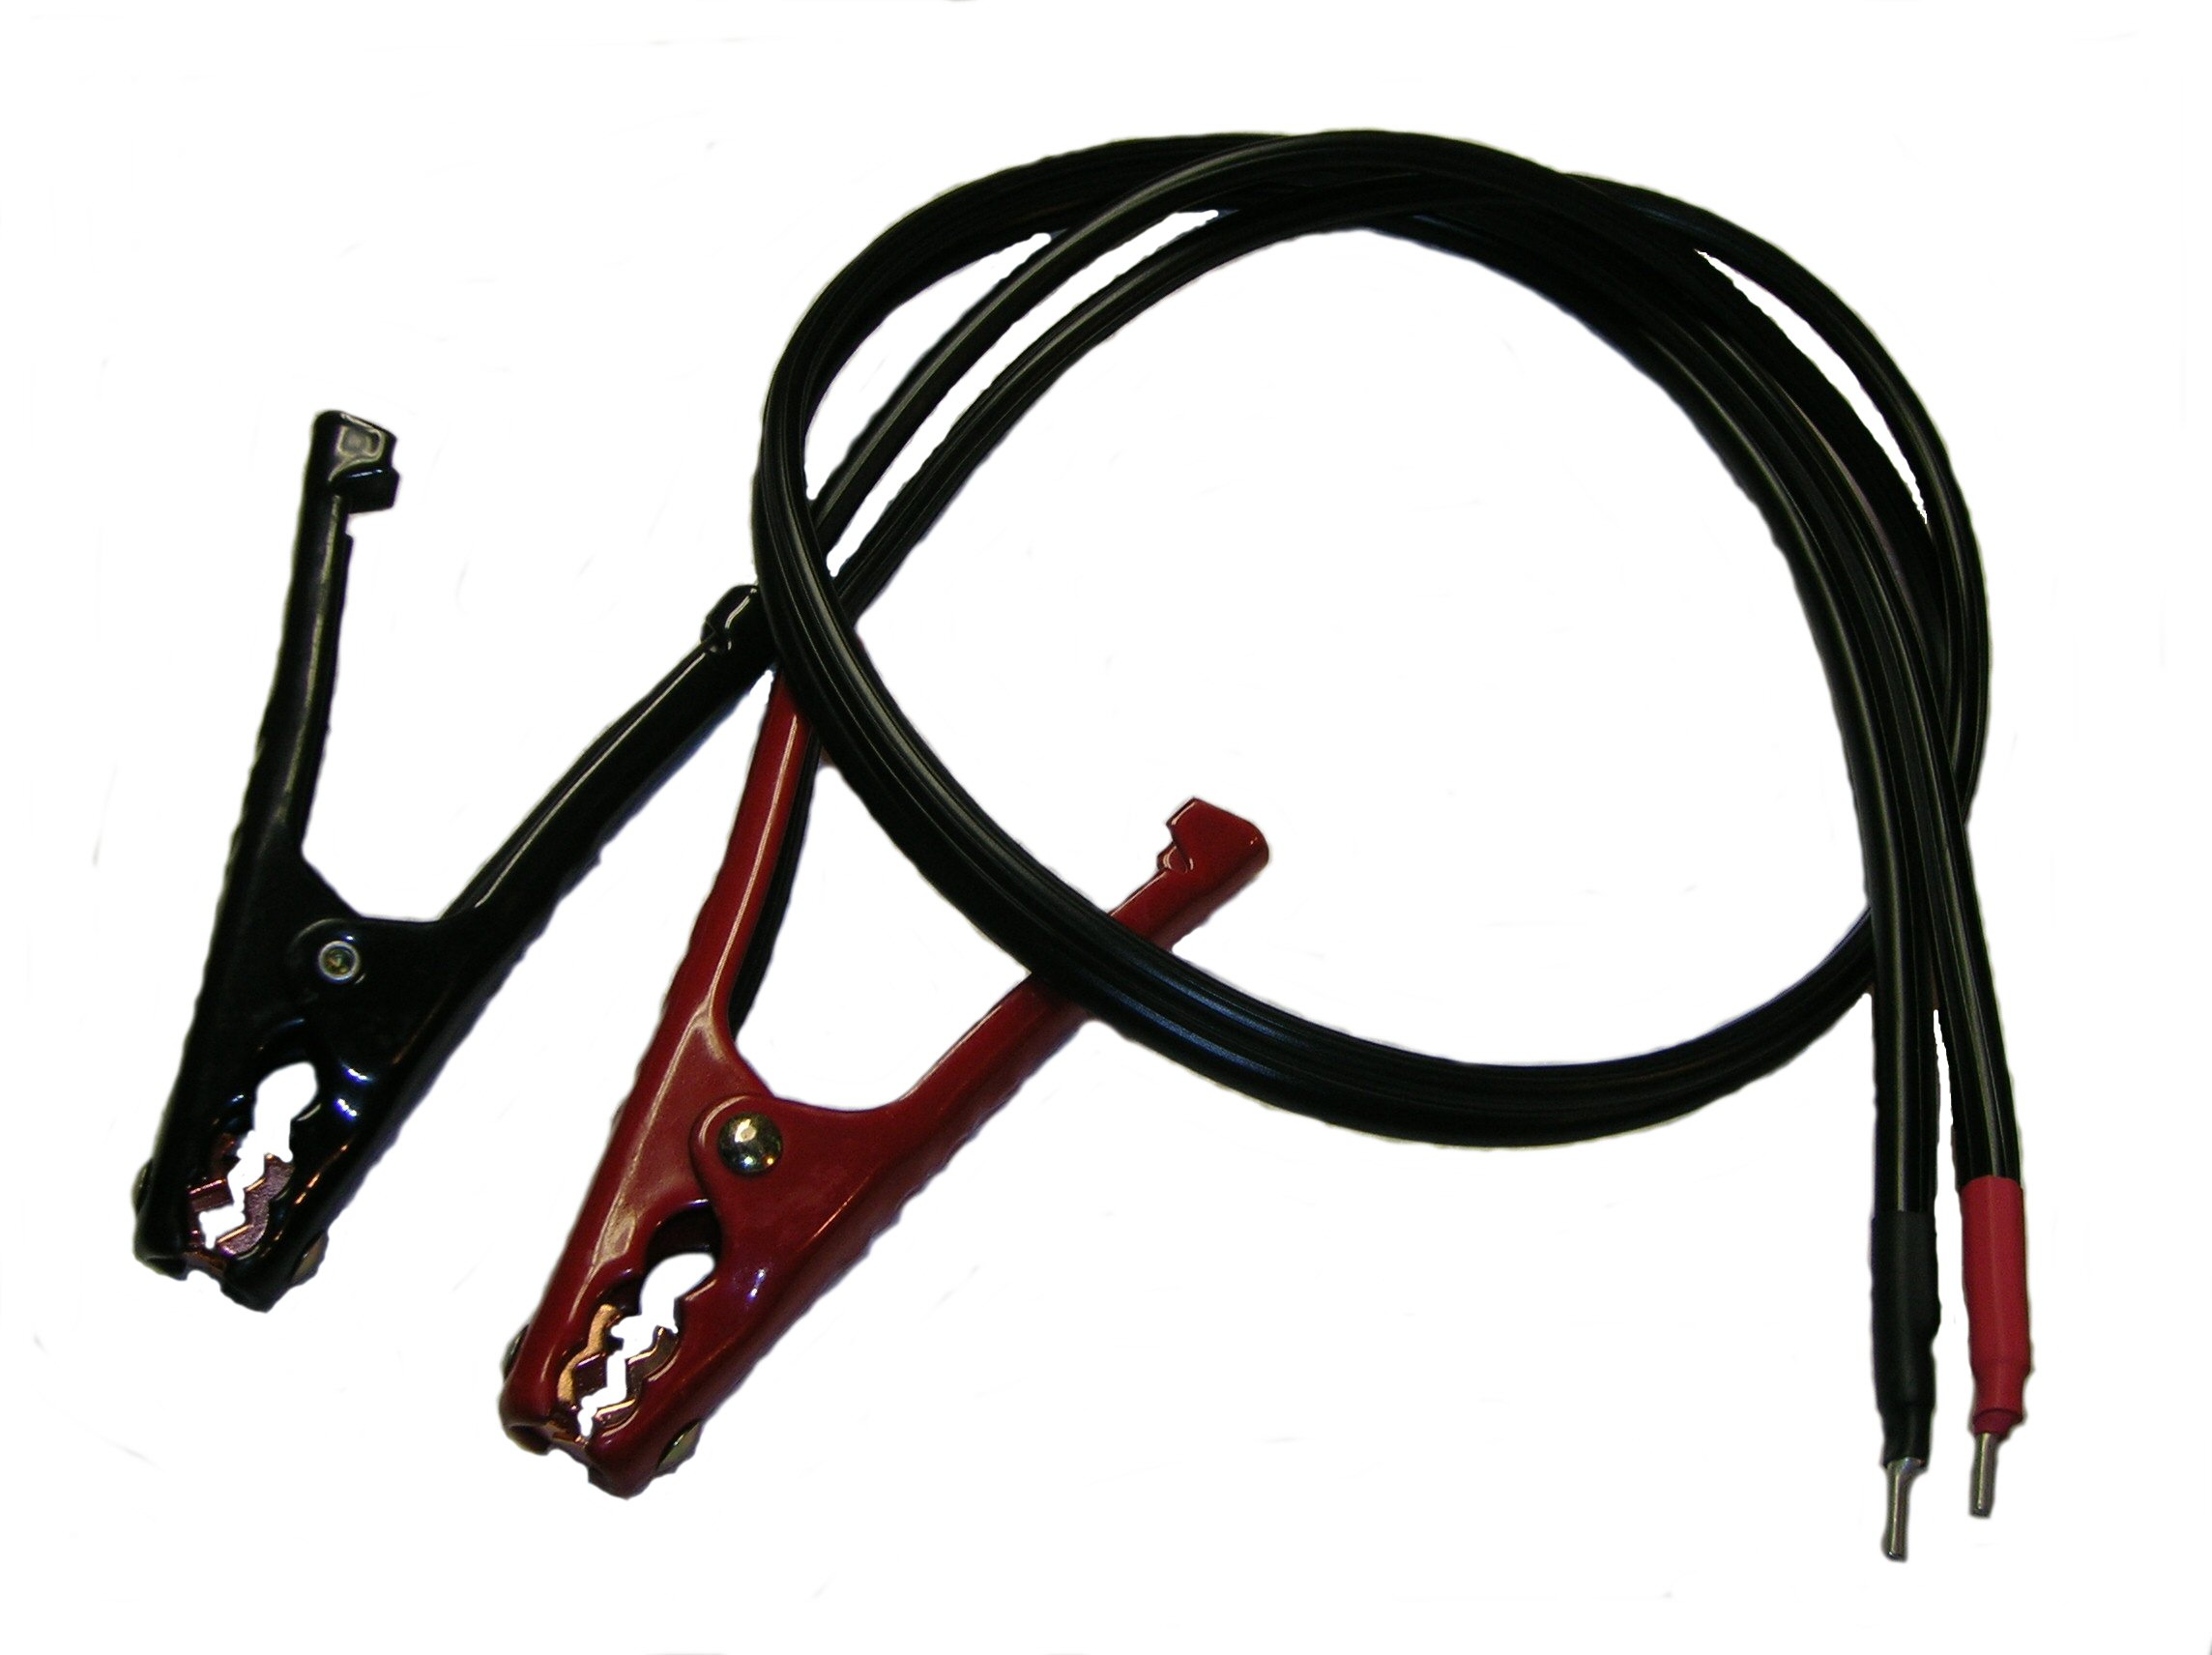 Charger alligator clip cable set